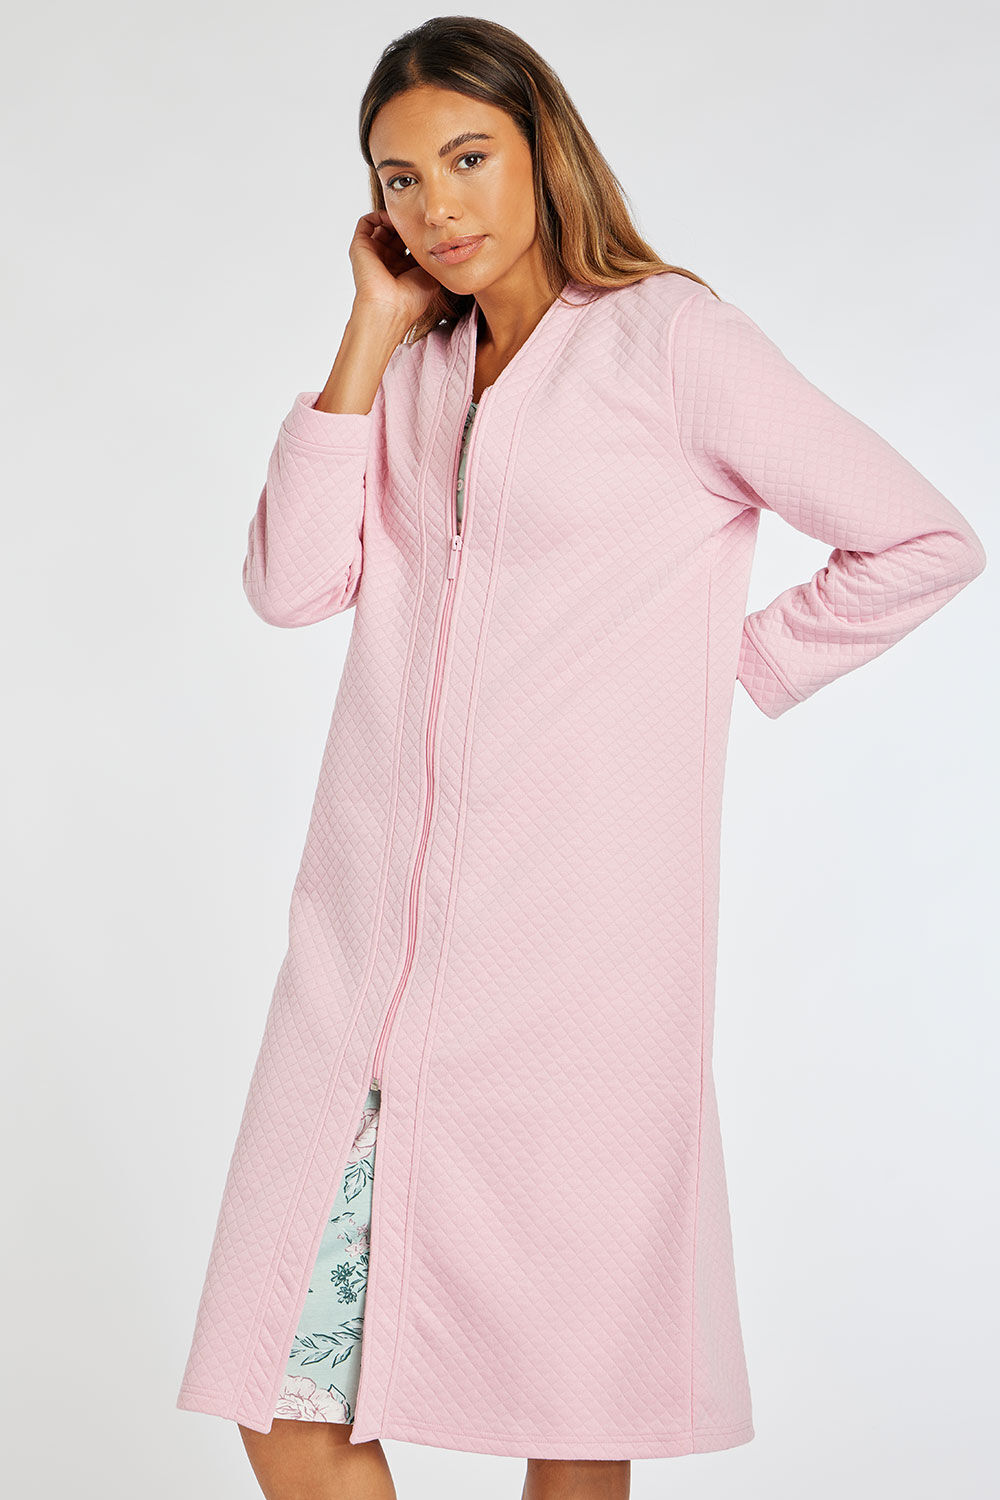 Bonmarche Pink Diamond Quilted Robe With Zip Through Fastening, Size: 08-10